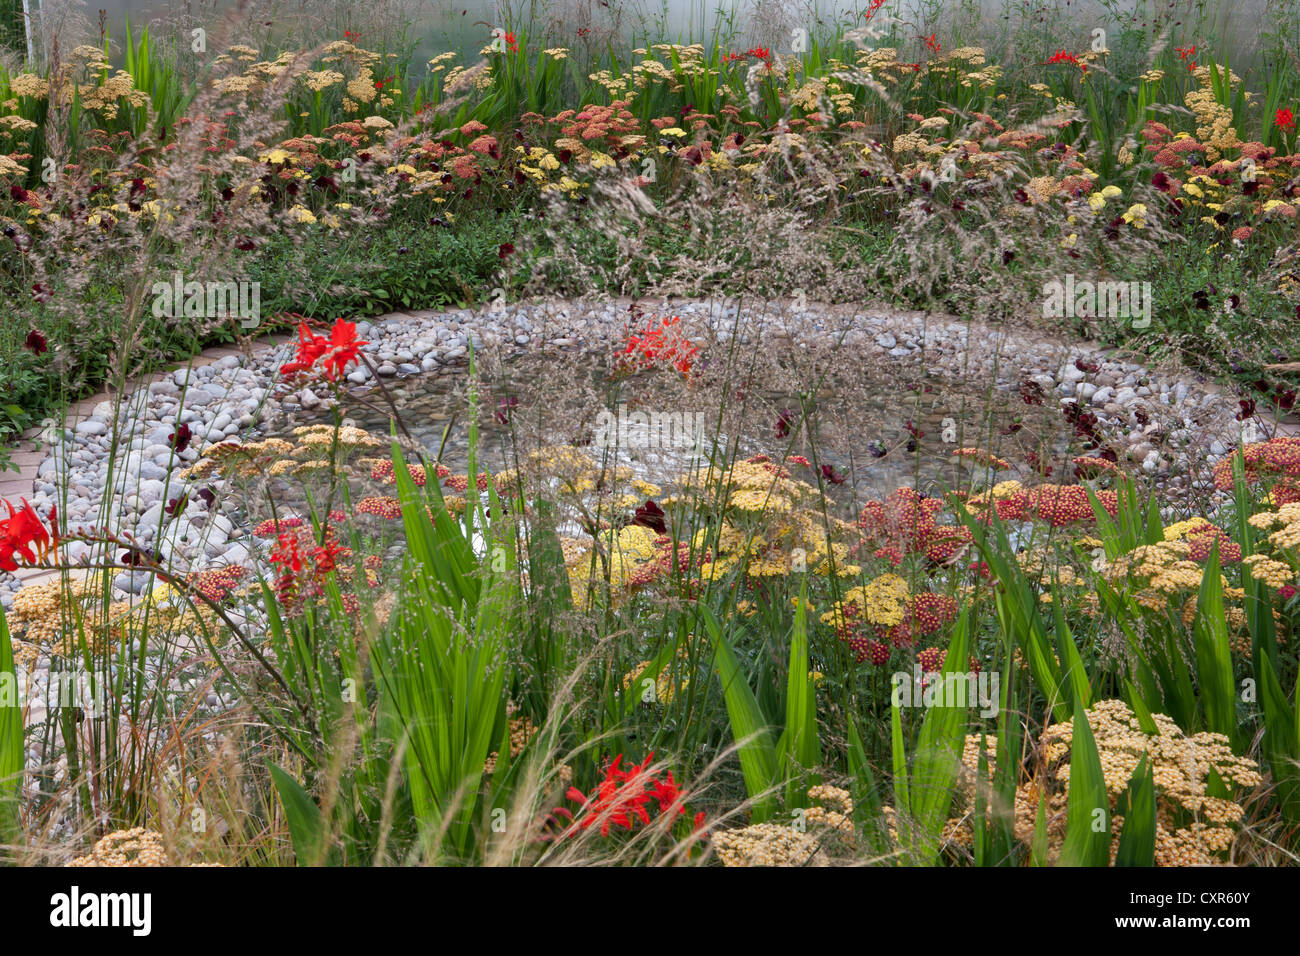 Summer garden with Mixed ornamental grasses grass and colourful flower border with a small pond water feature UK Stock Photo